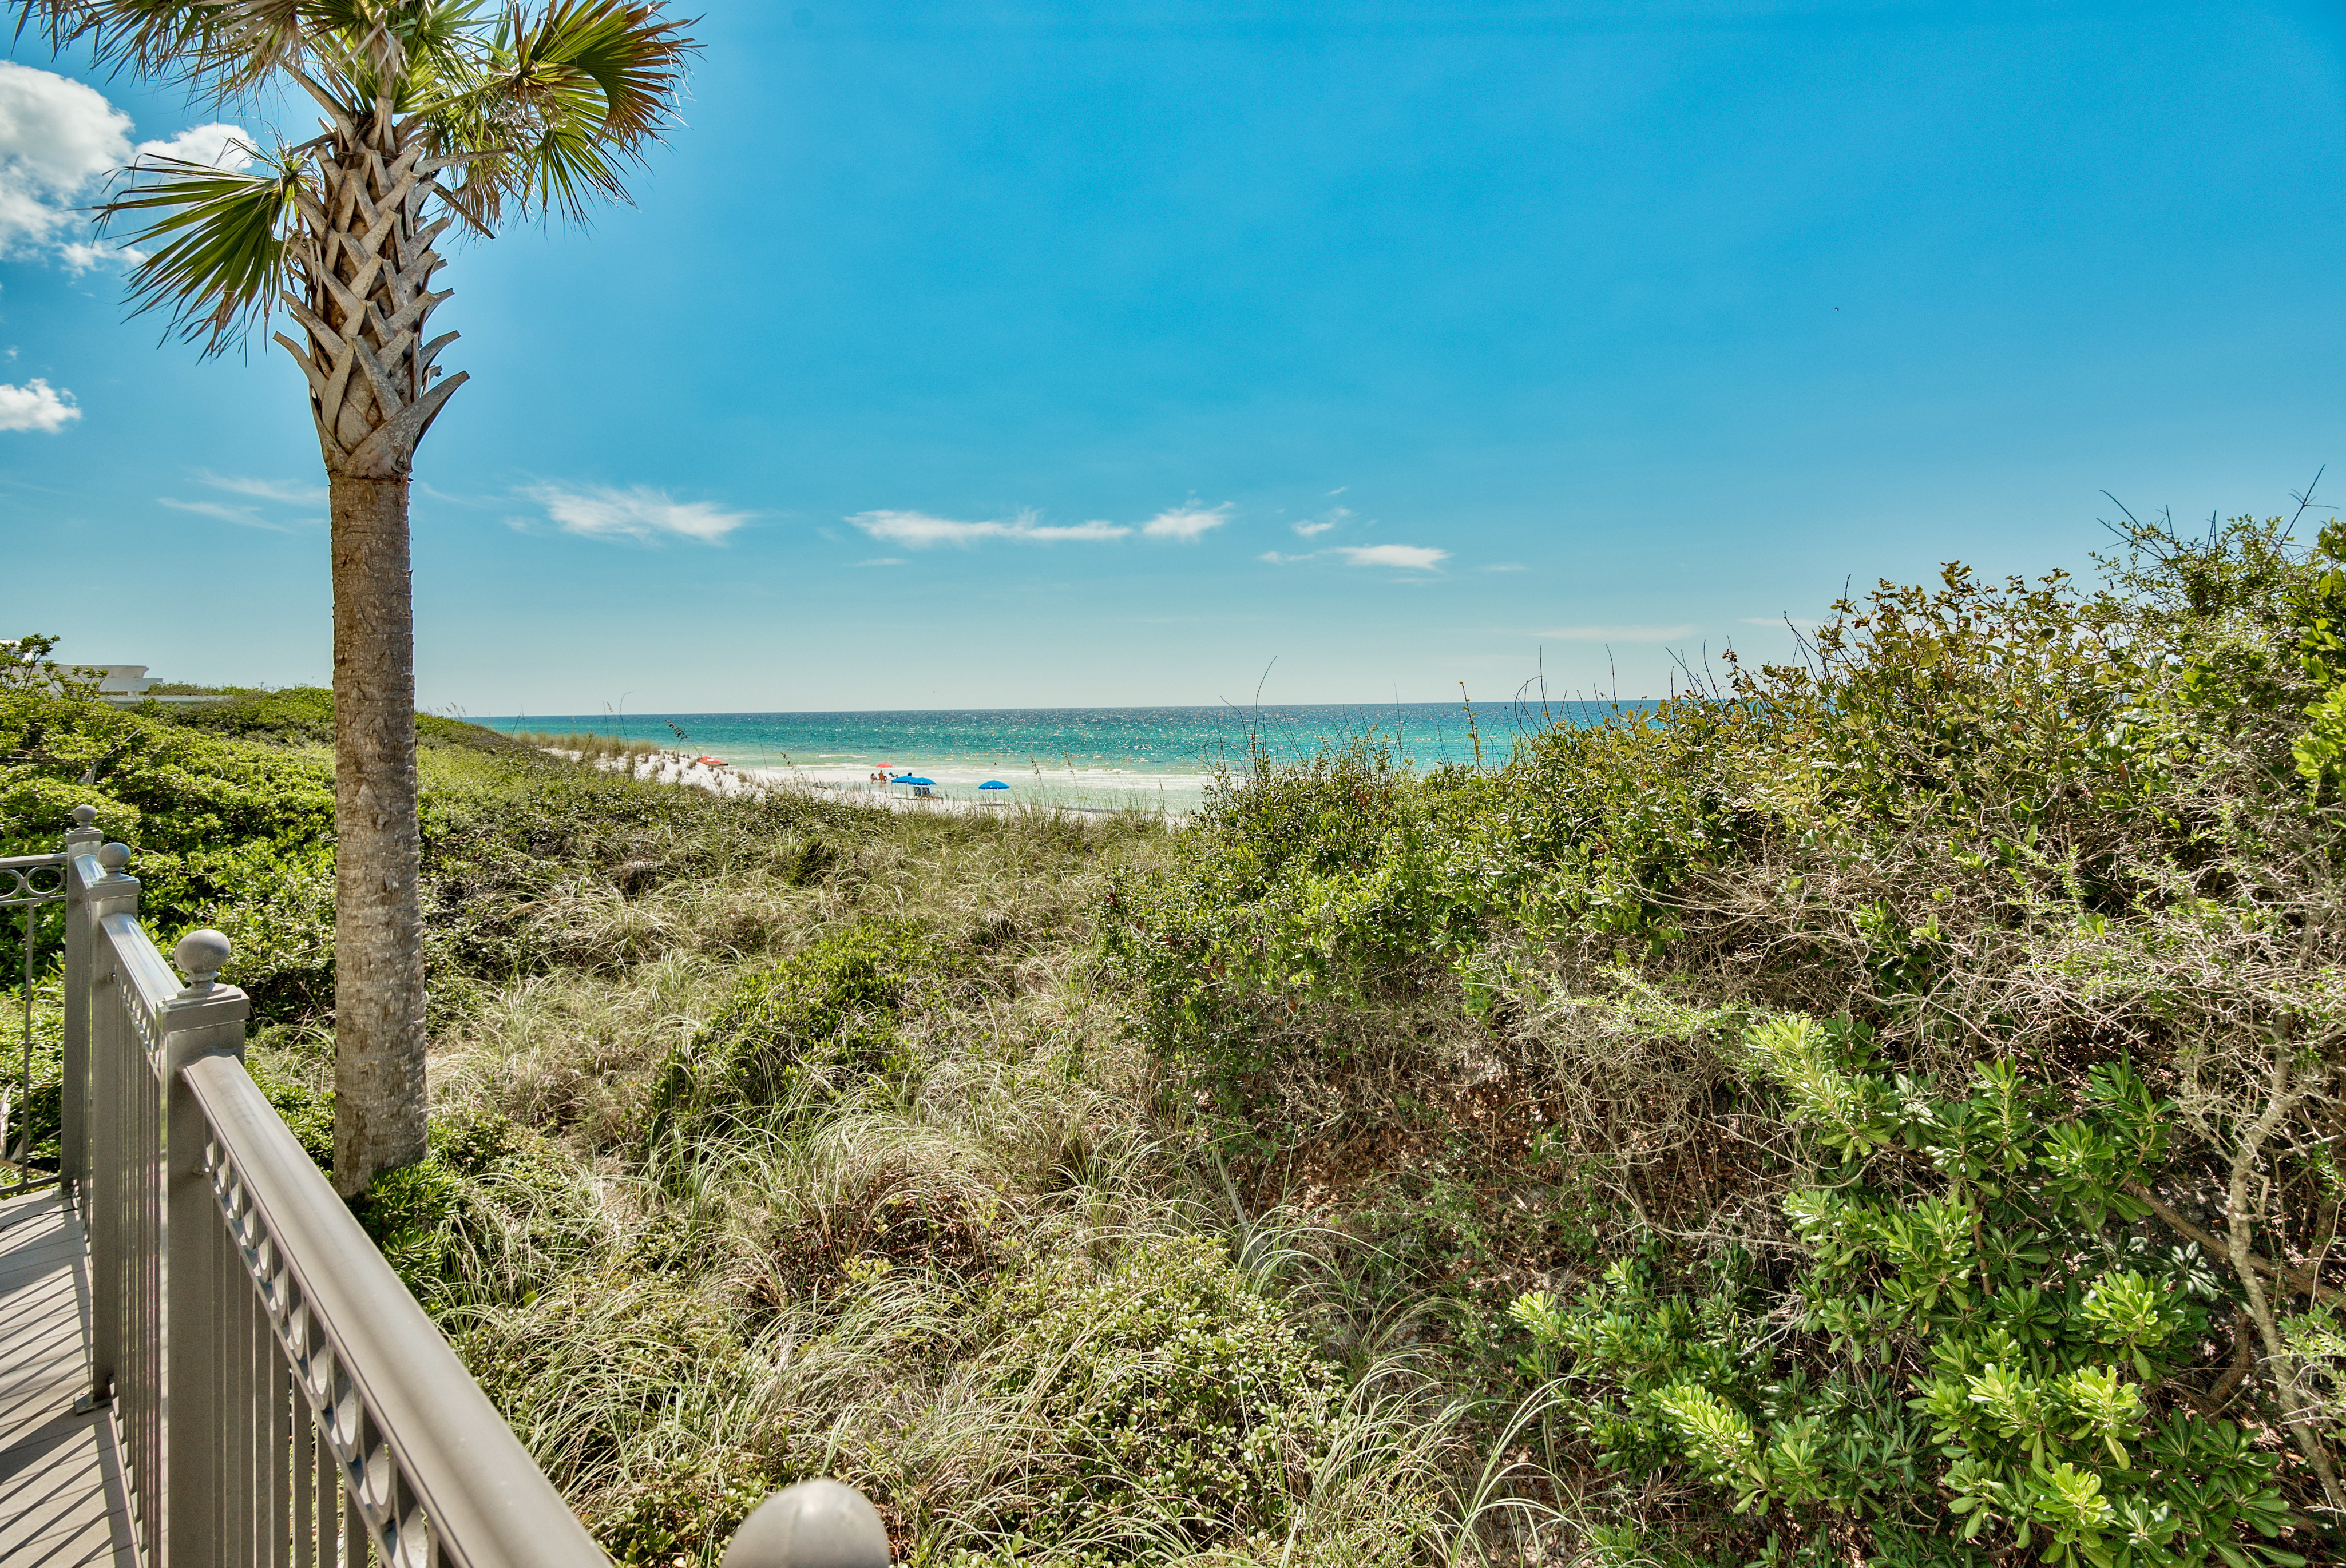 A view of native beach vegetation looking toward the gulf